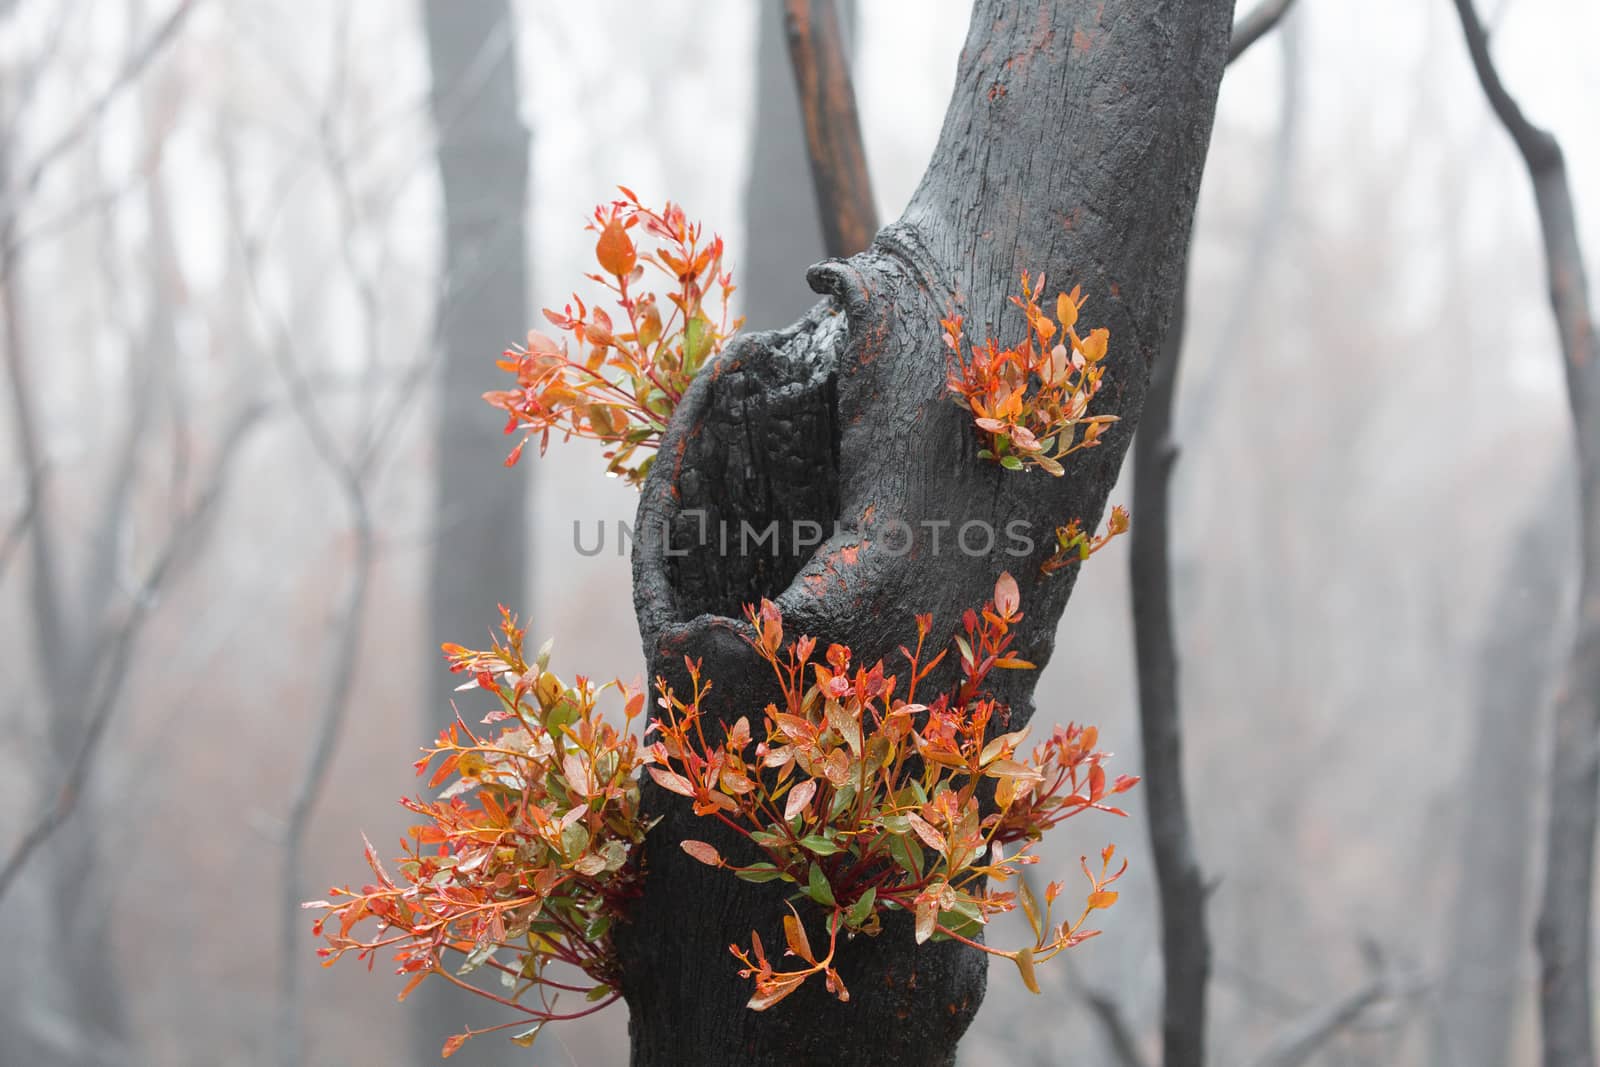 A burnt tree flourishing with bright new fresh growth after bush fires on a foggy morning